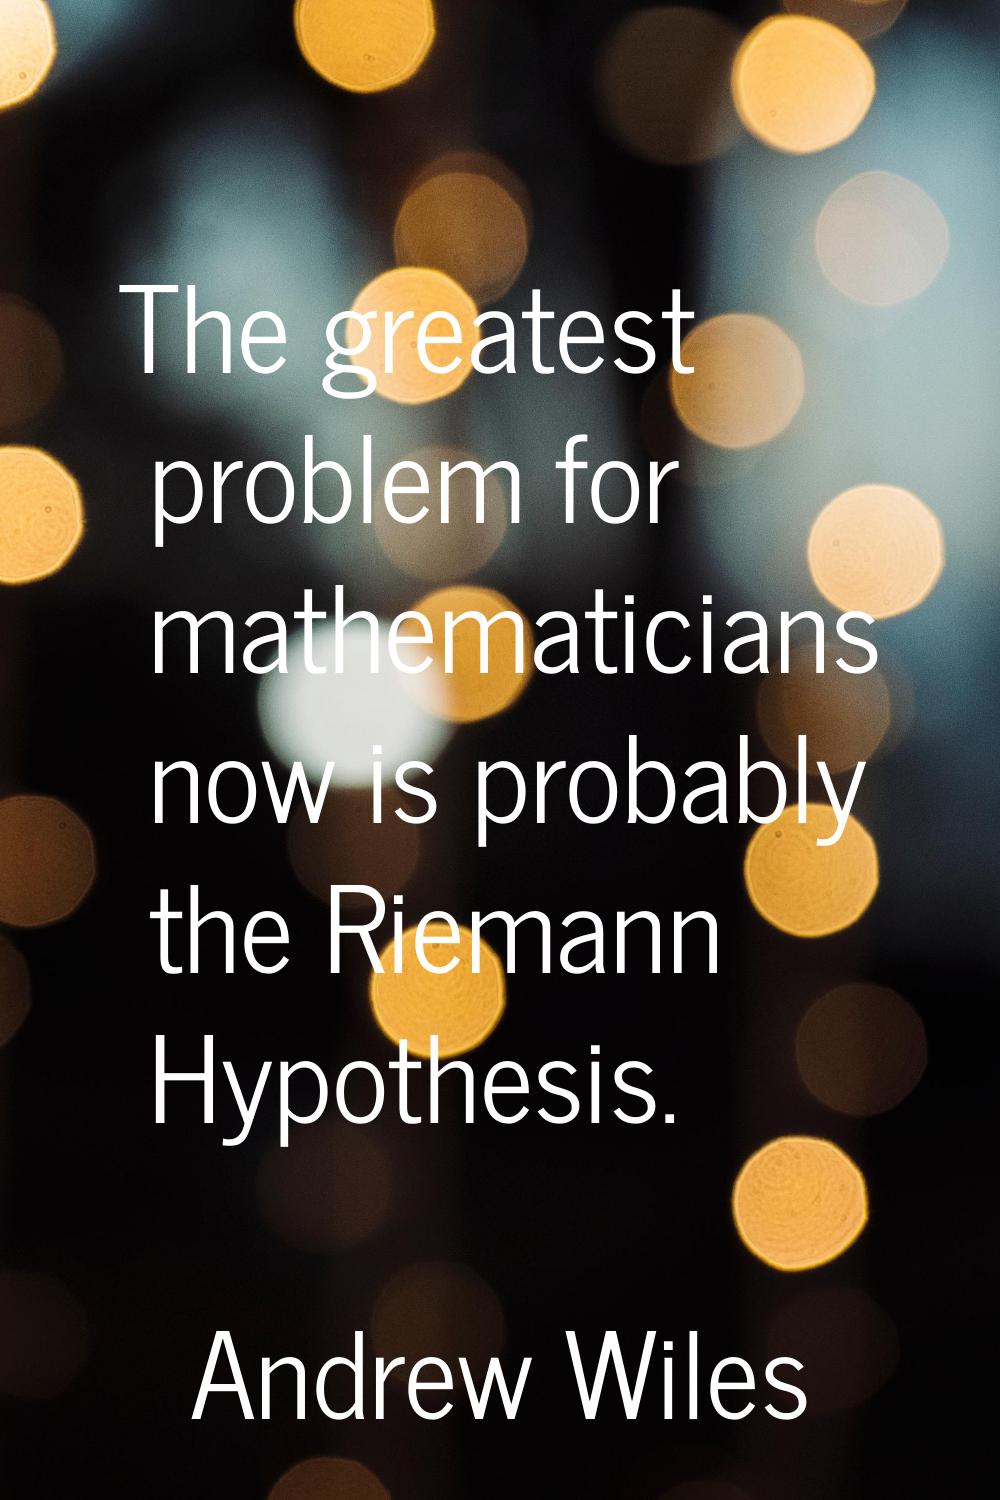 The greatest problem for mathematicians now is probably the Riemann Hypothesis.